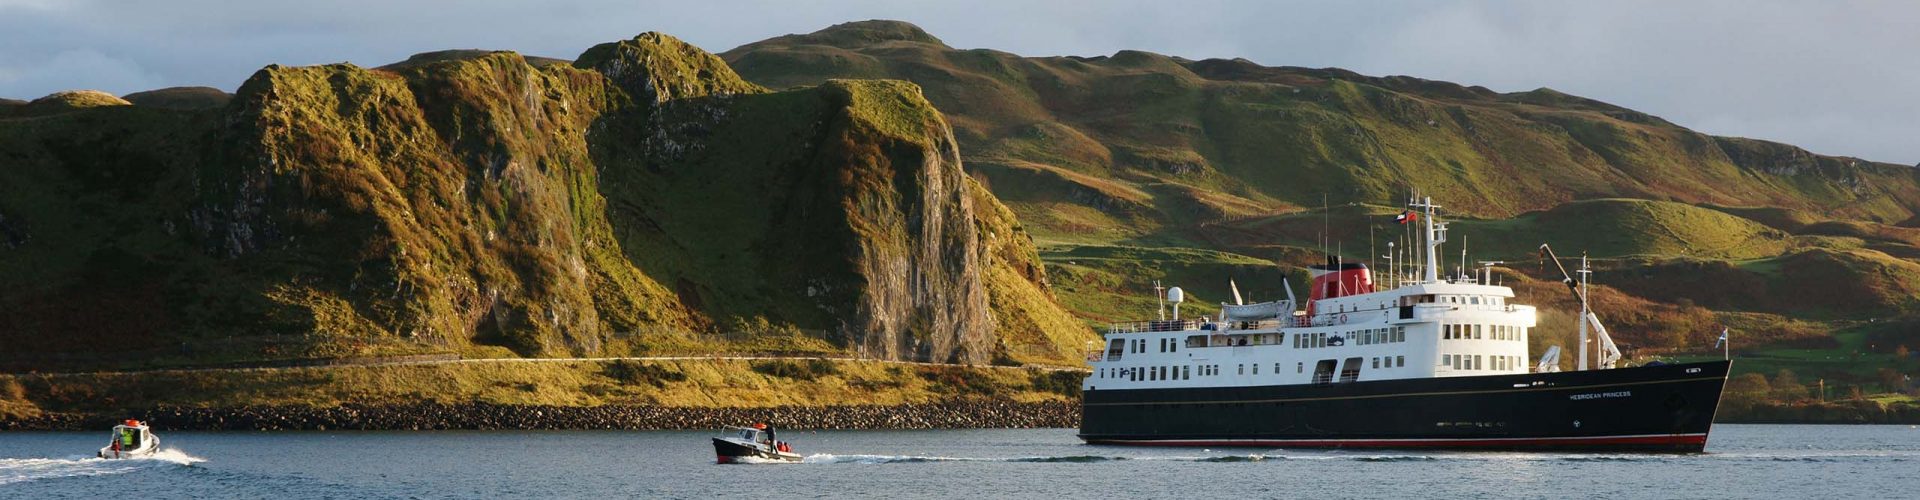 The Hebridean Princess moored on the shores of a Scottish Isle